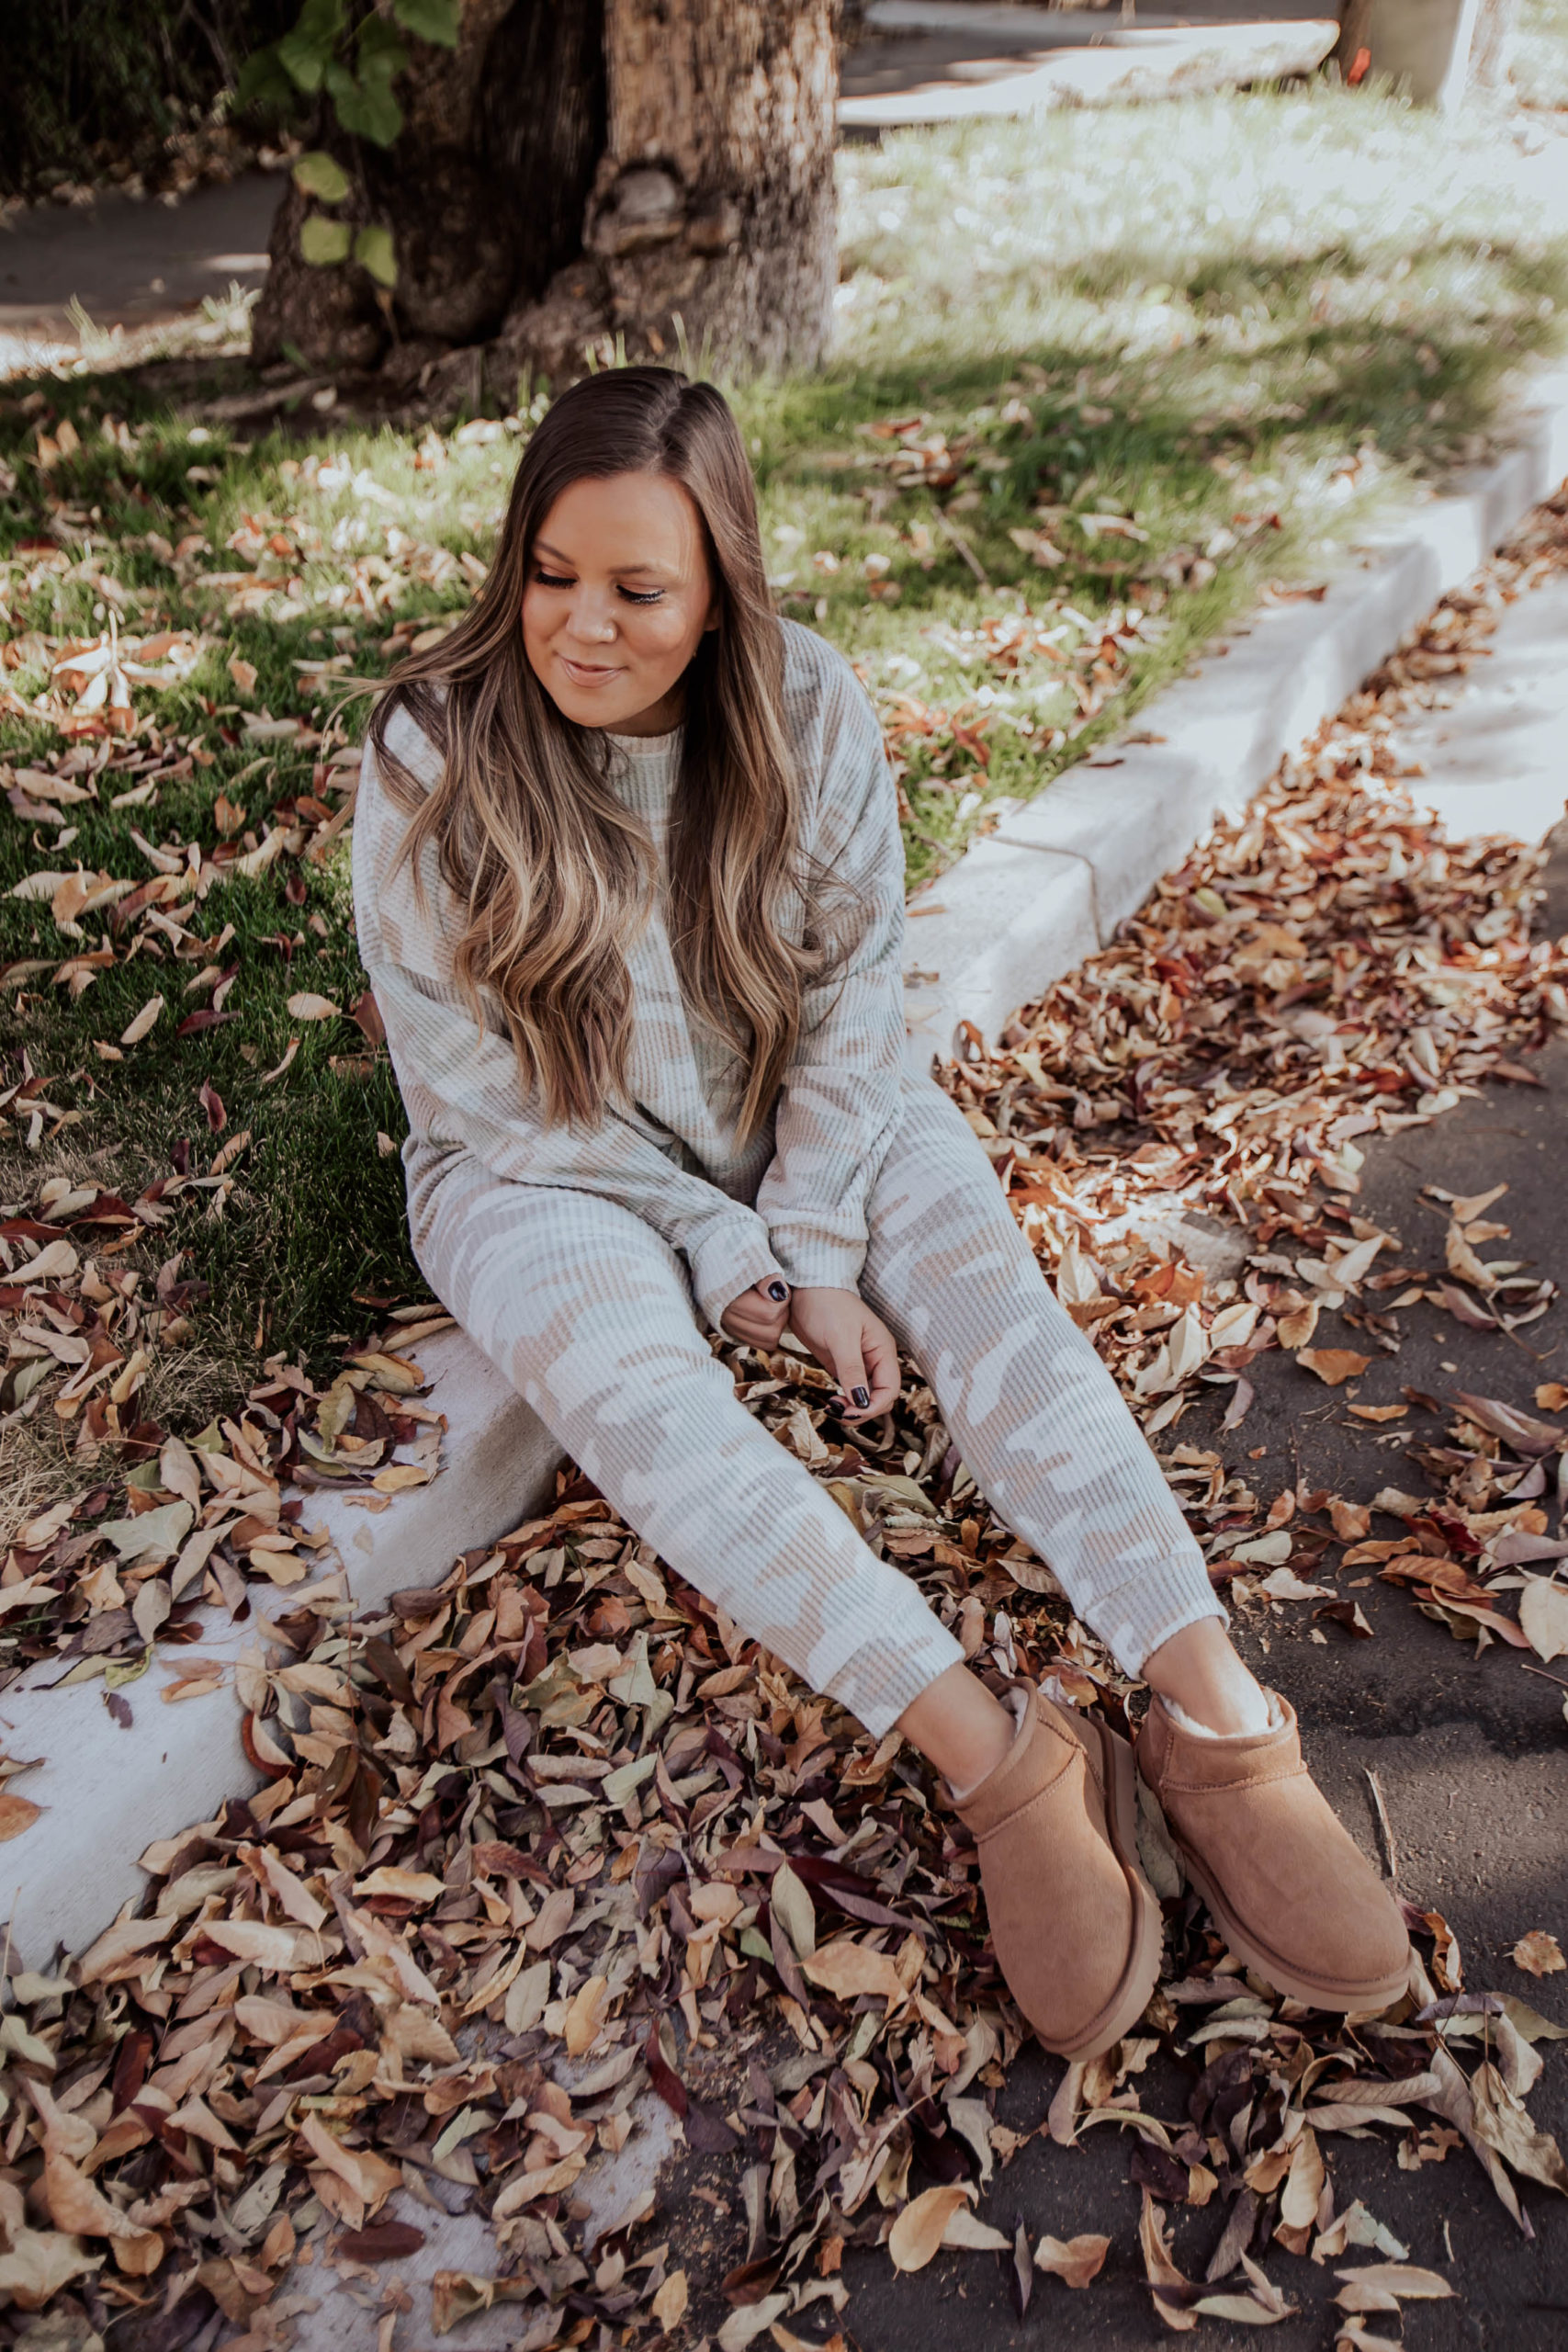 Reno bloggers, Ashley Zeal Hurd and Emily Wieczorek share their favorite Ugg styles. These would make the perfect holiday gifts!